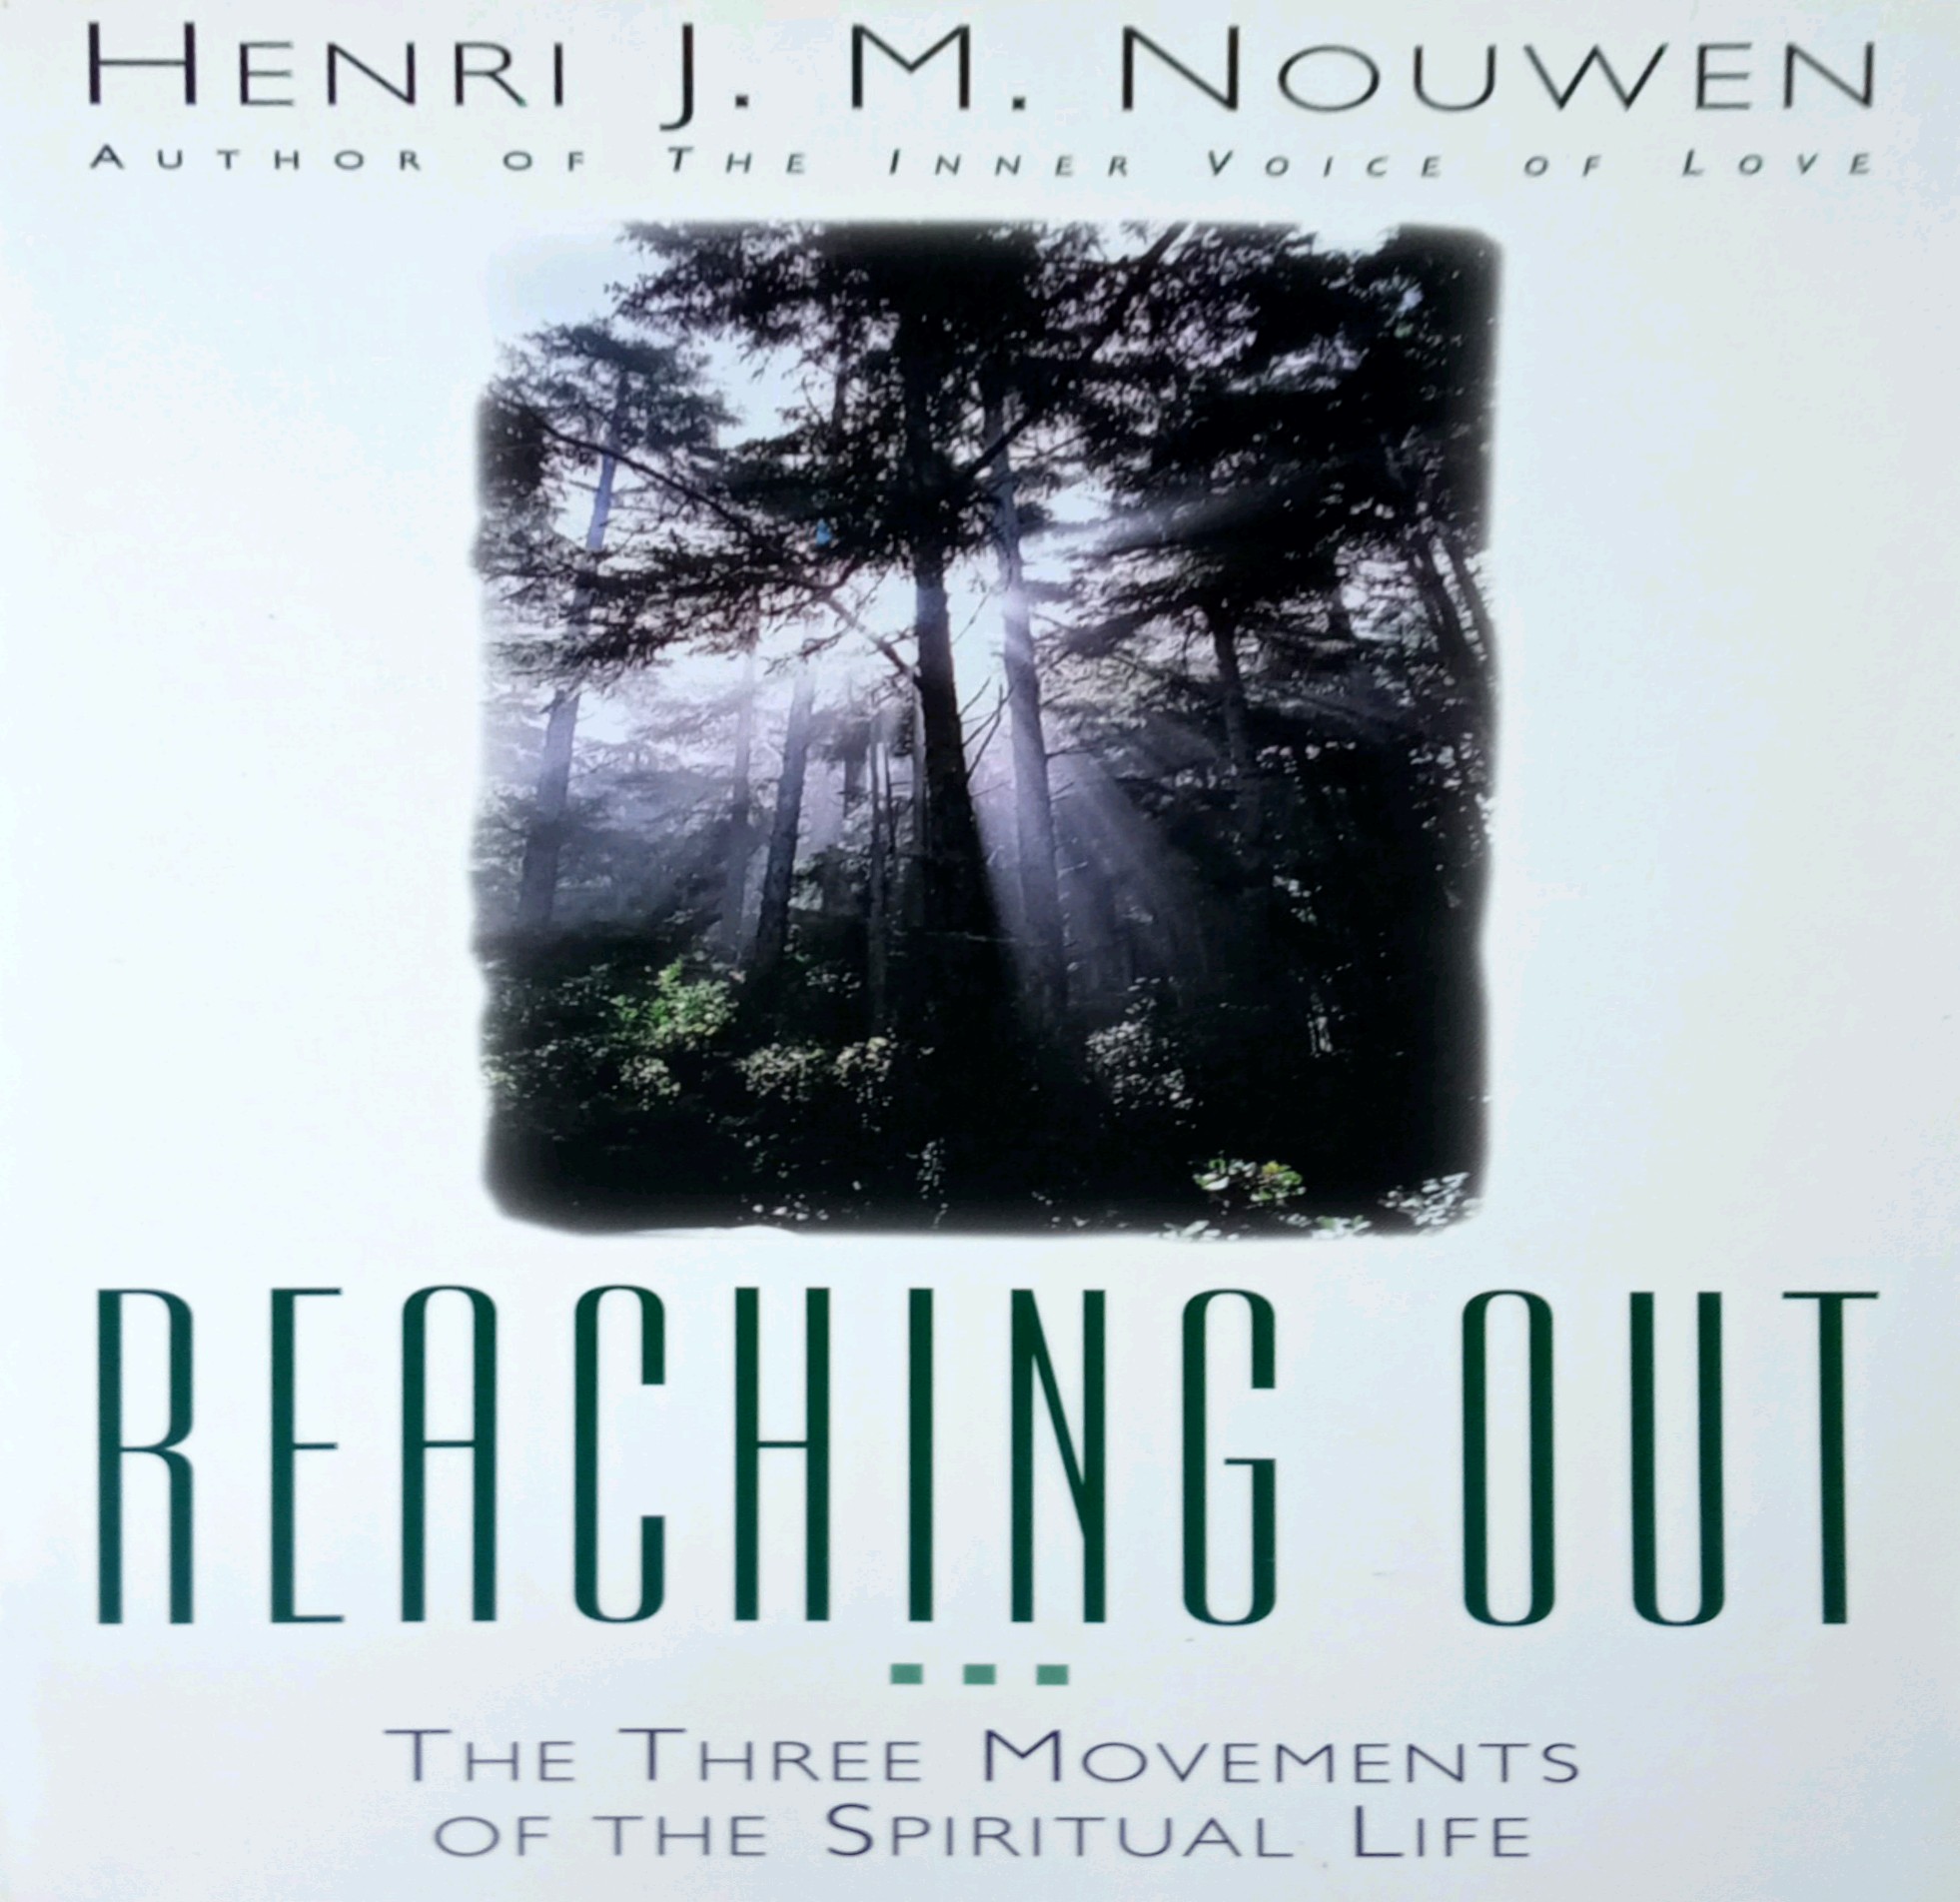 REACHING OUT: THE THREE MOVEMENTS OF THE SPIRITUAL LIFE